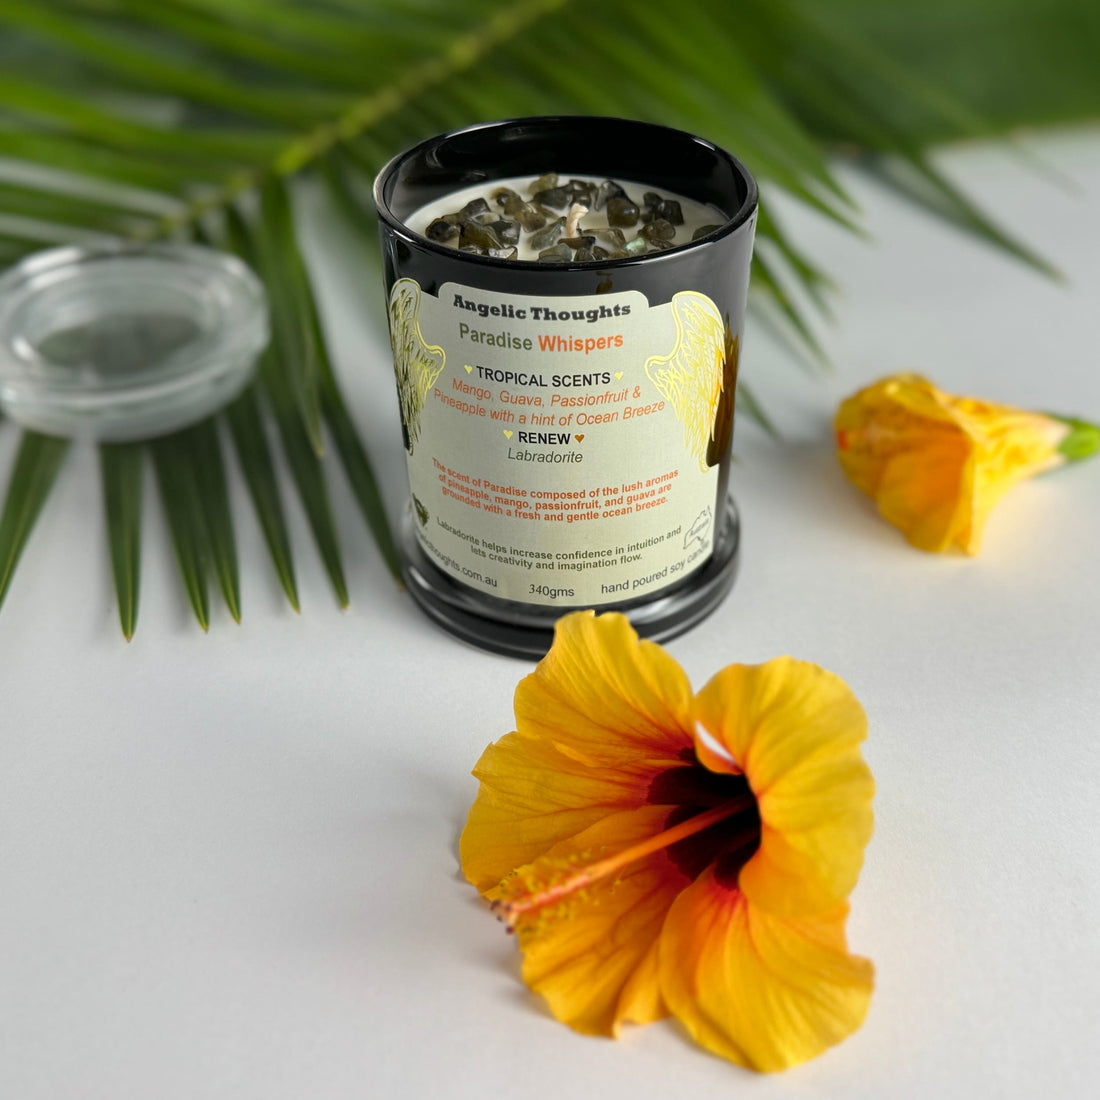 Golden orange hibiscus in foreground with Paradise Whispers Candle in black simplicity glass container with standard angelic thoughts product label